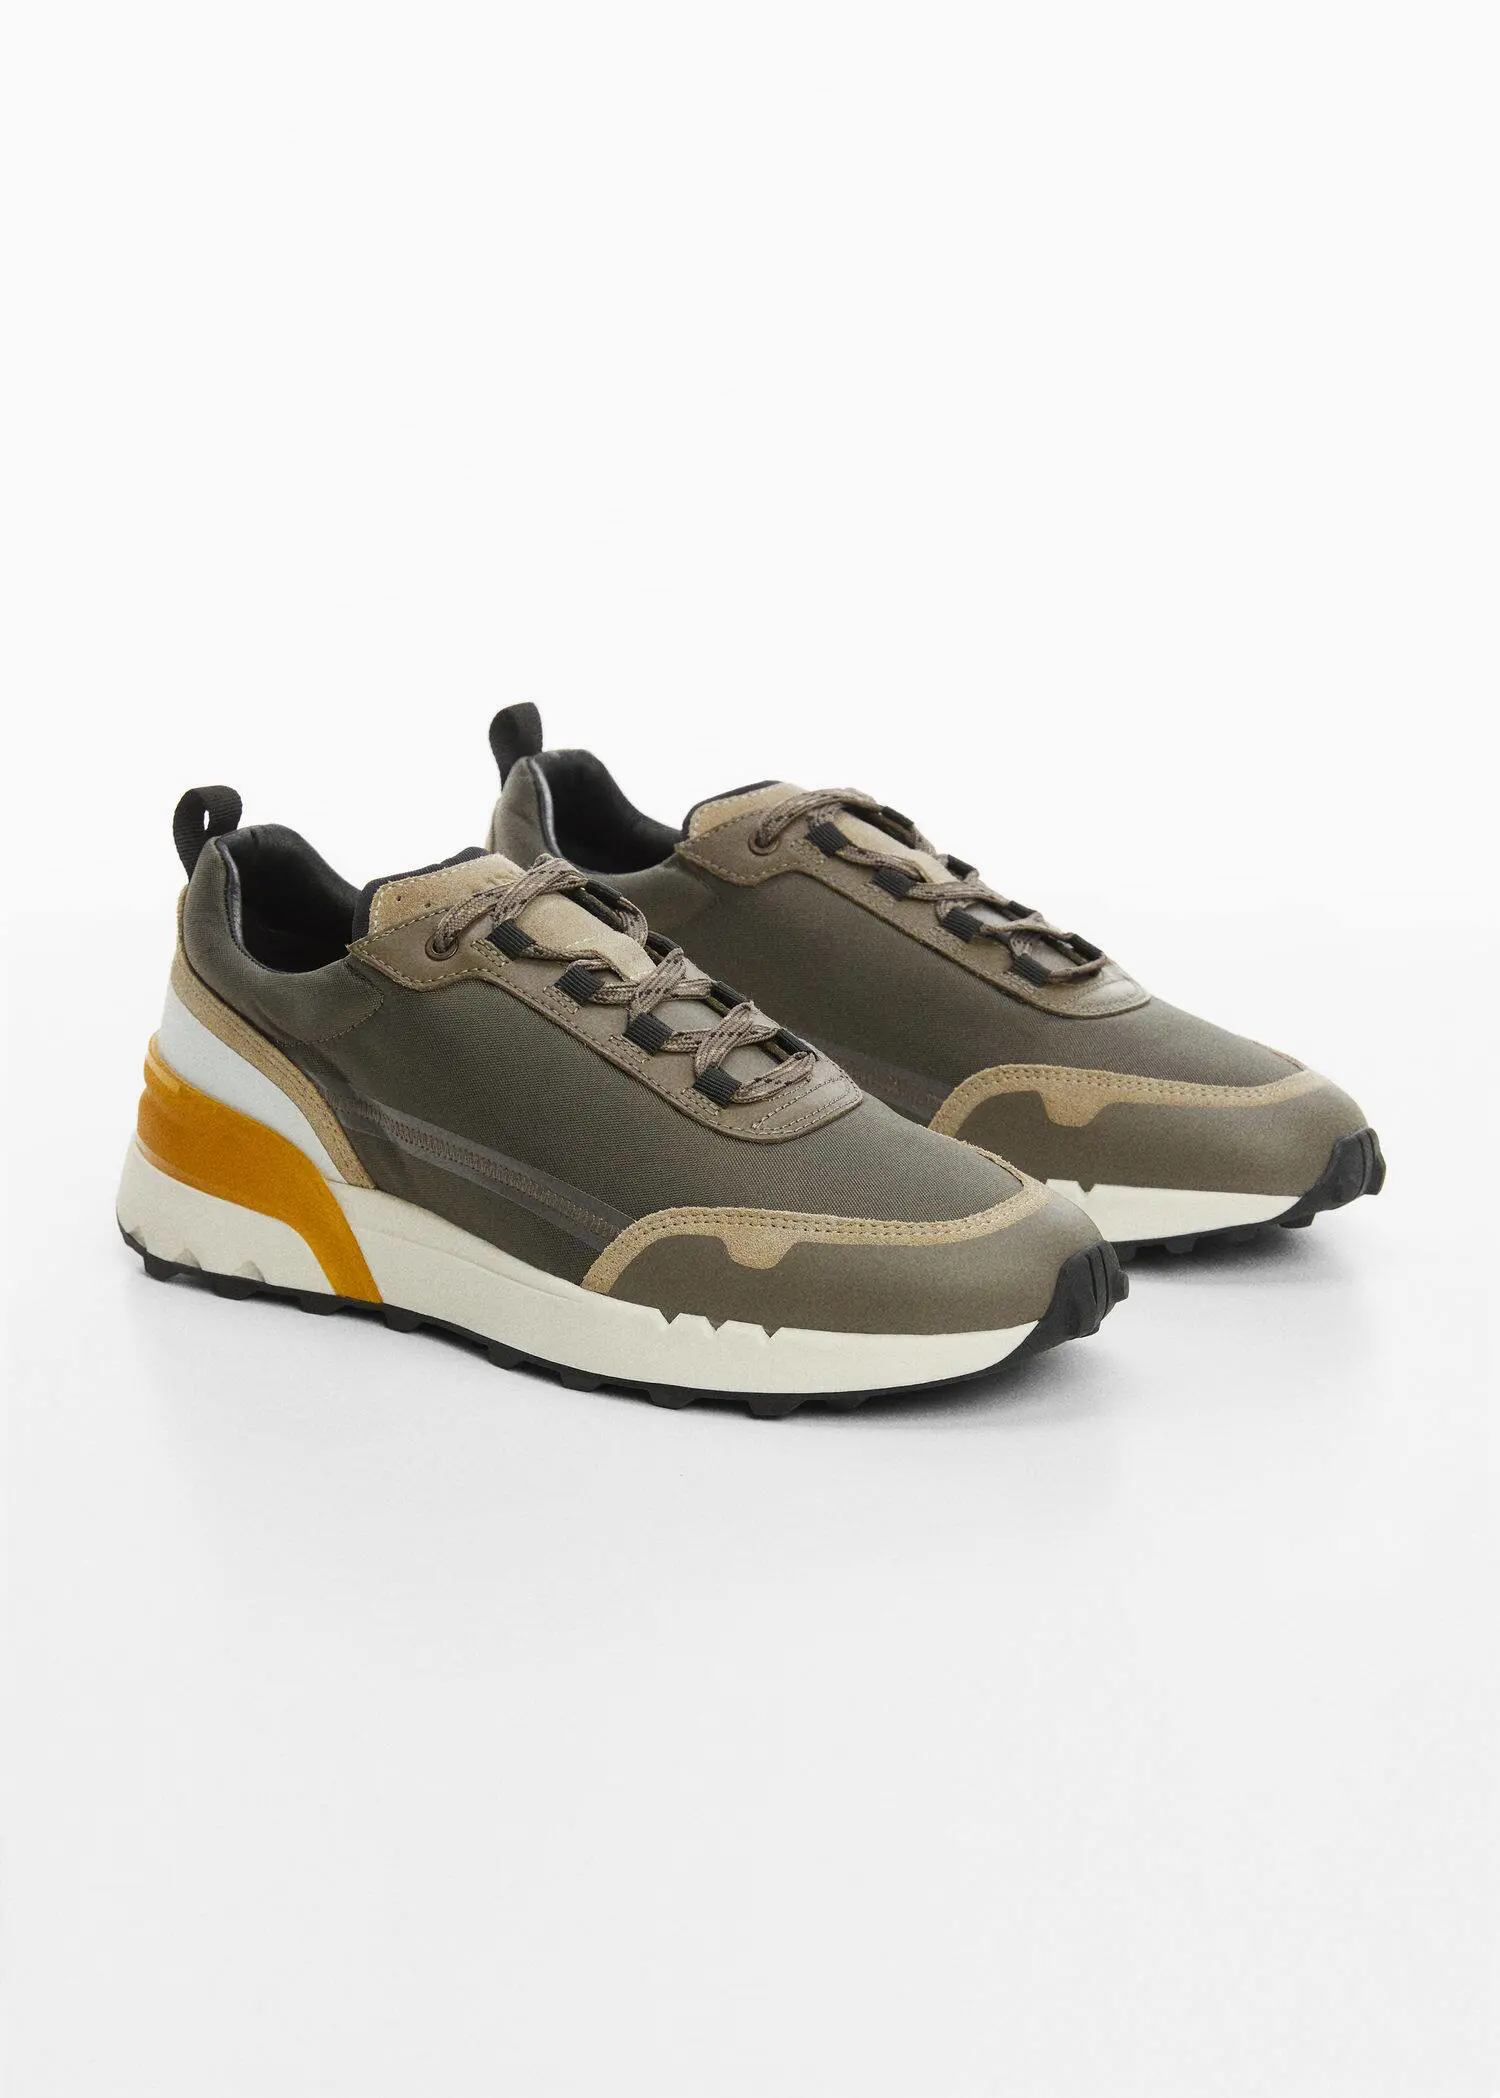 Mango OrthoLite® combined sneakers. 2